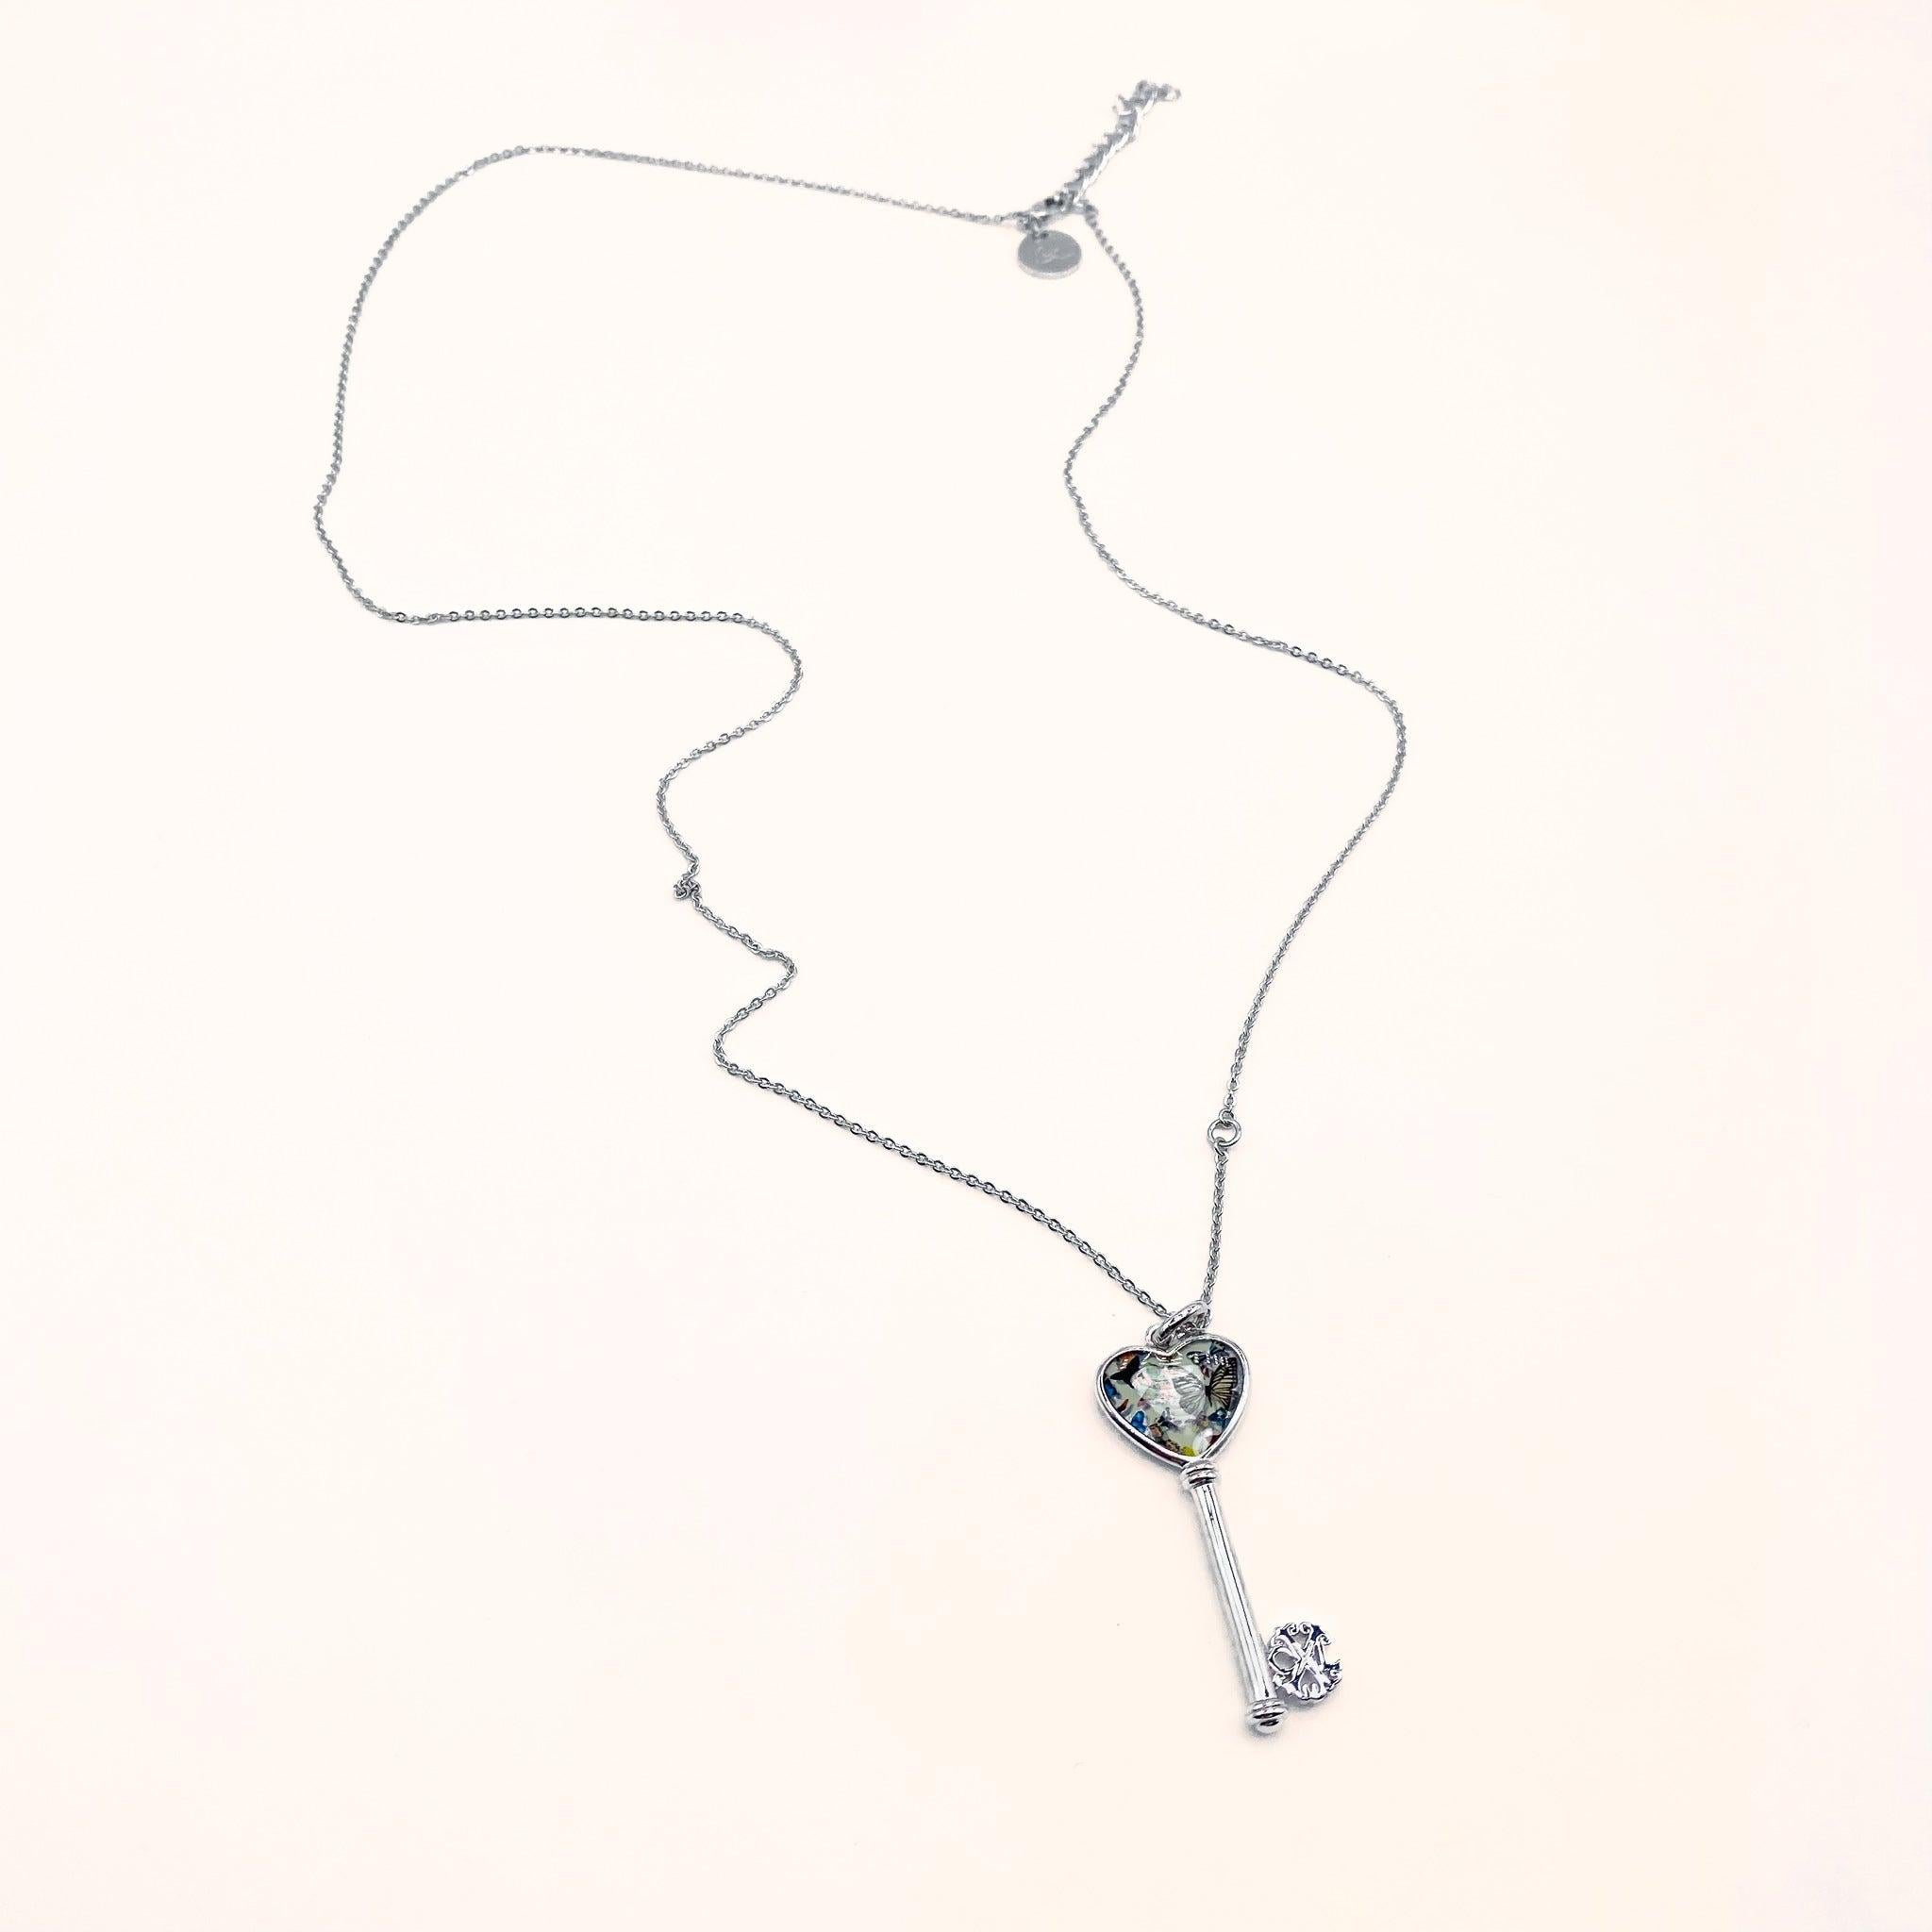 Christian Lacroix Silver Plated Pendant Necklace In Excellent Condition For Sale In London, GB